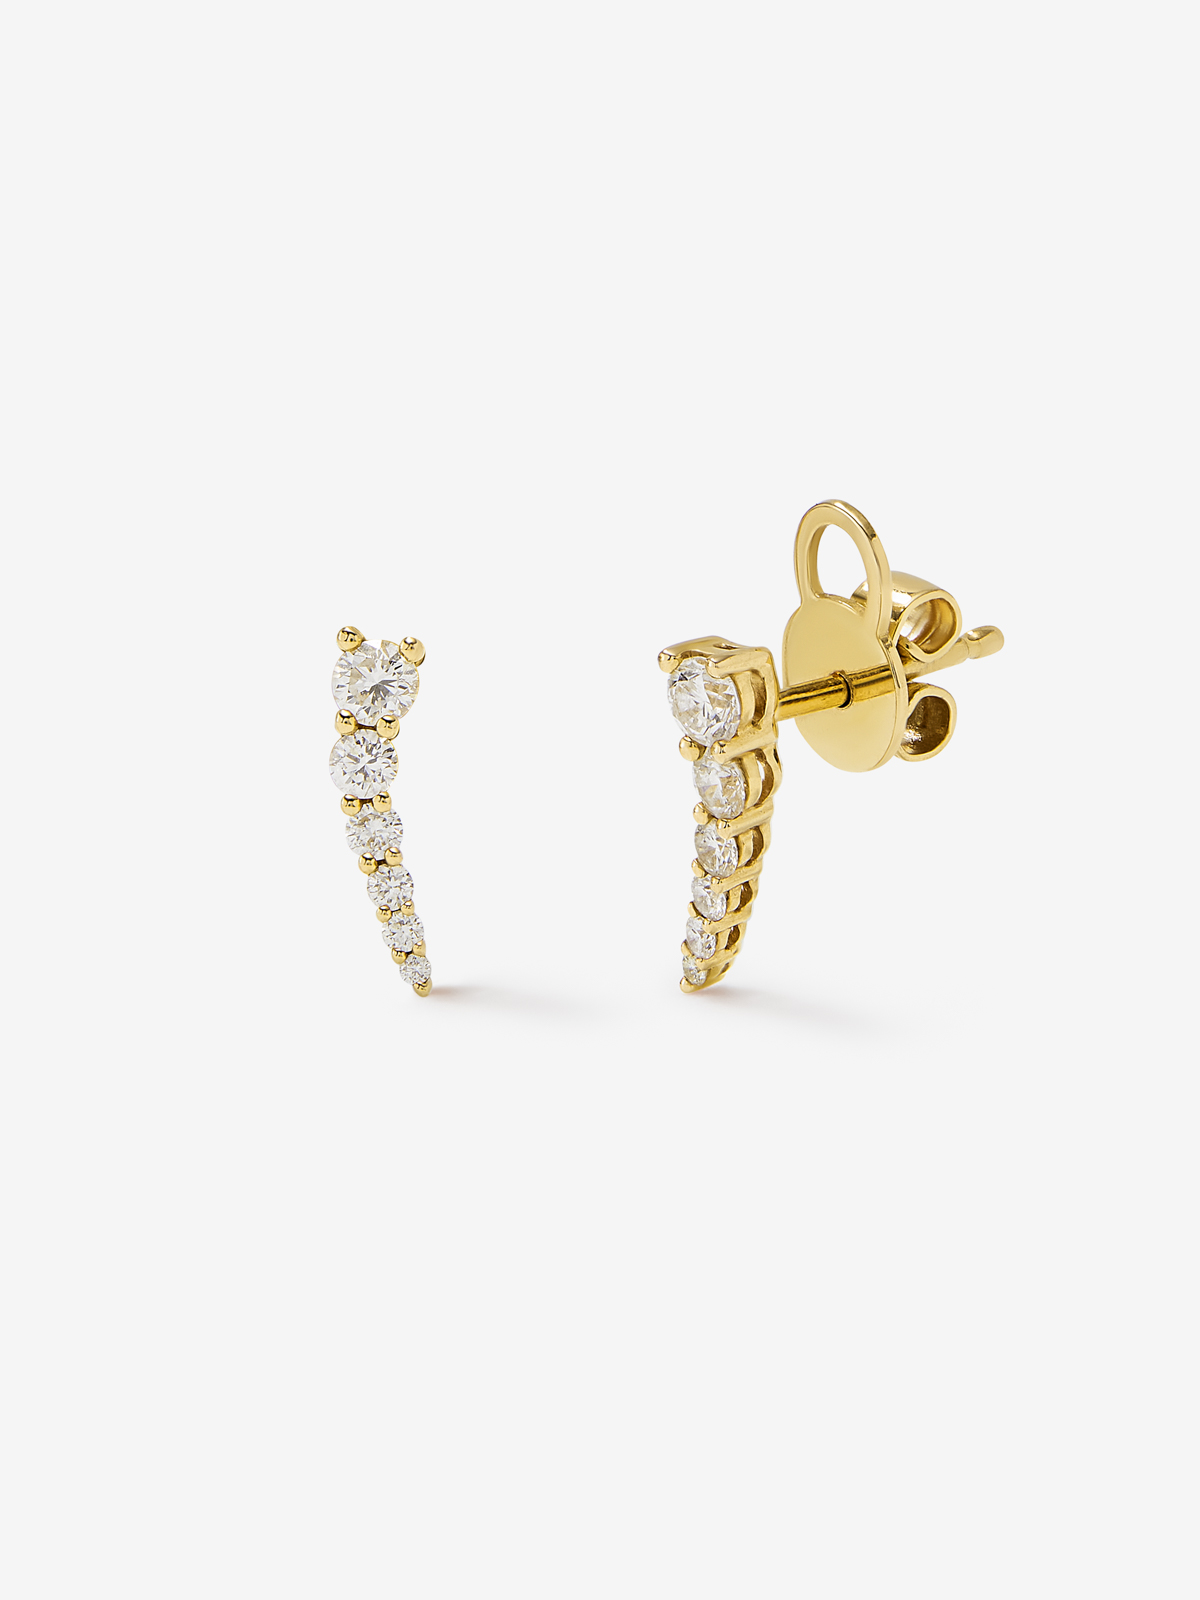 18K yellow gold climbing earrings with 12 brilliant-cut diamonds with a total of 0.34 cts